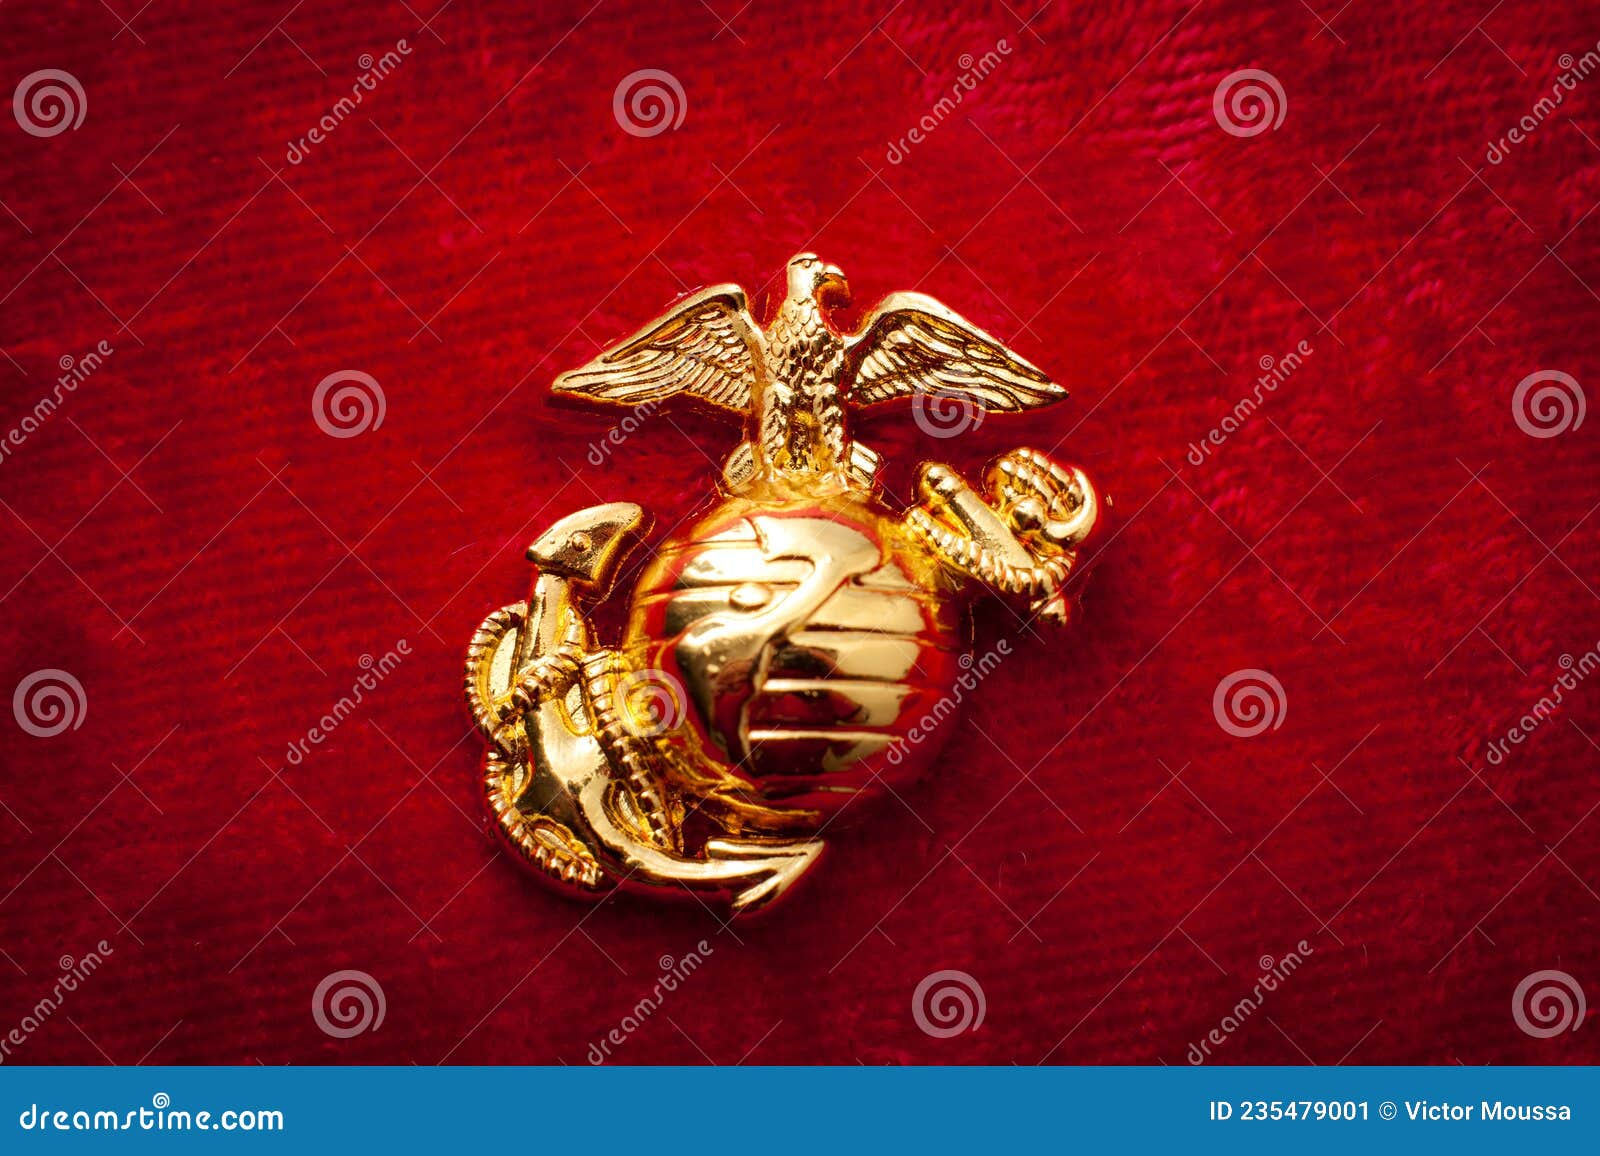 macro image of the us marine corps emblem on red velvet as background and a grungy aesthetic. semper fidelis or semper fi is latin